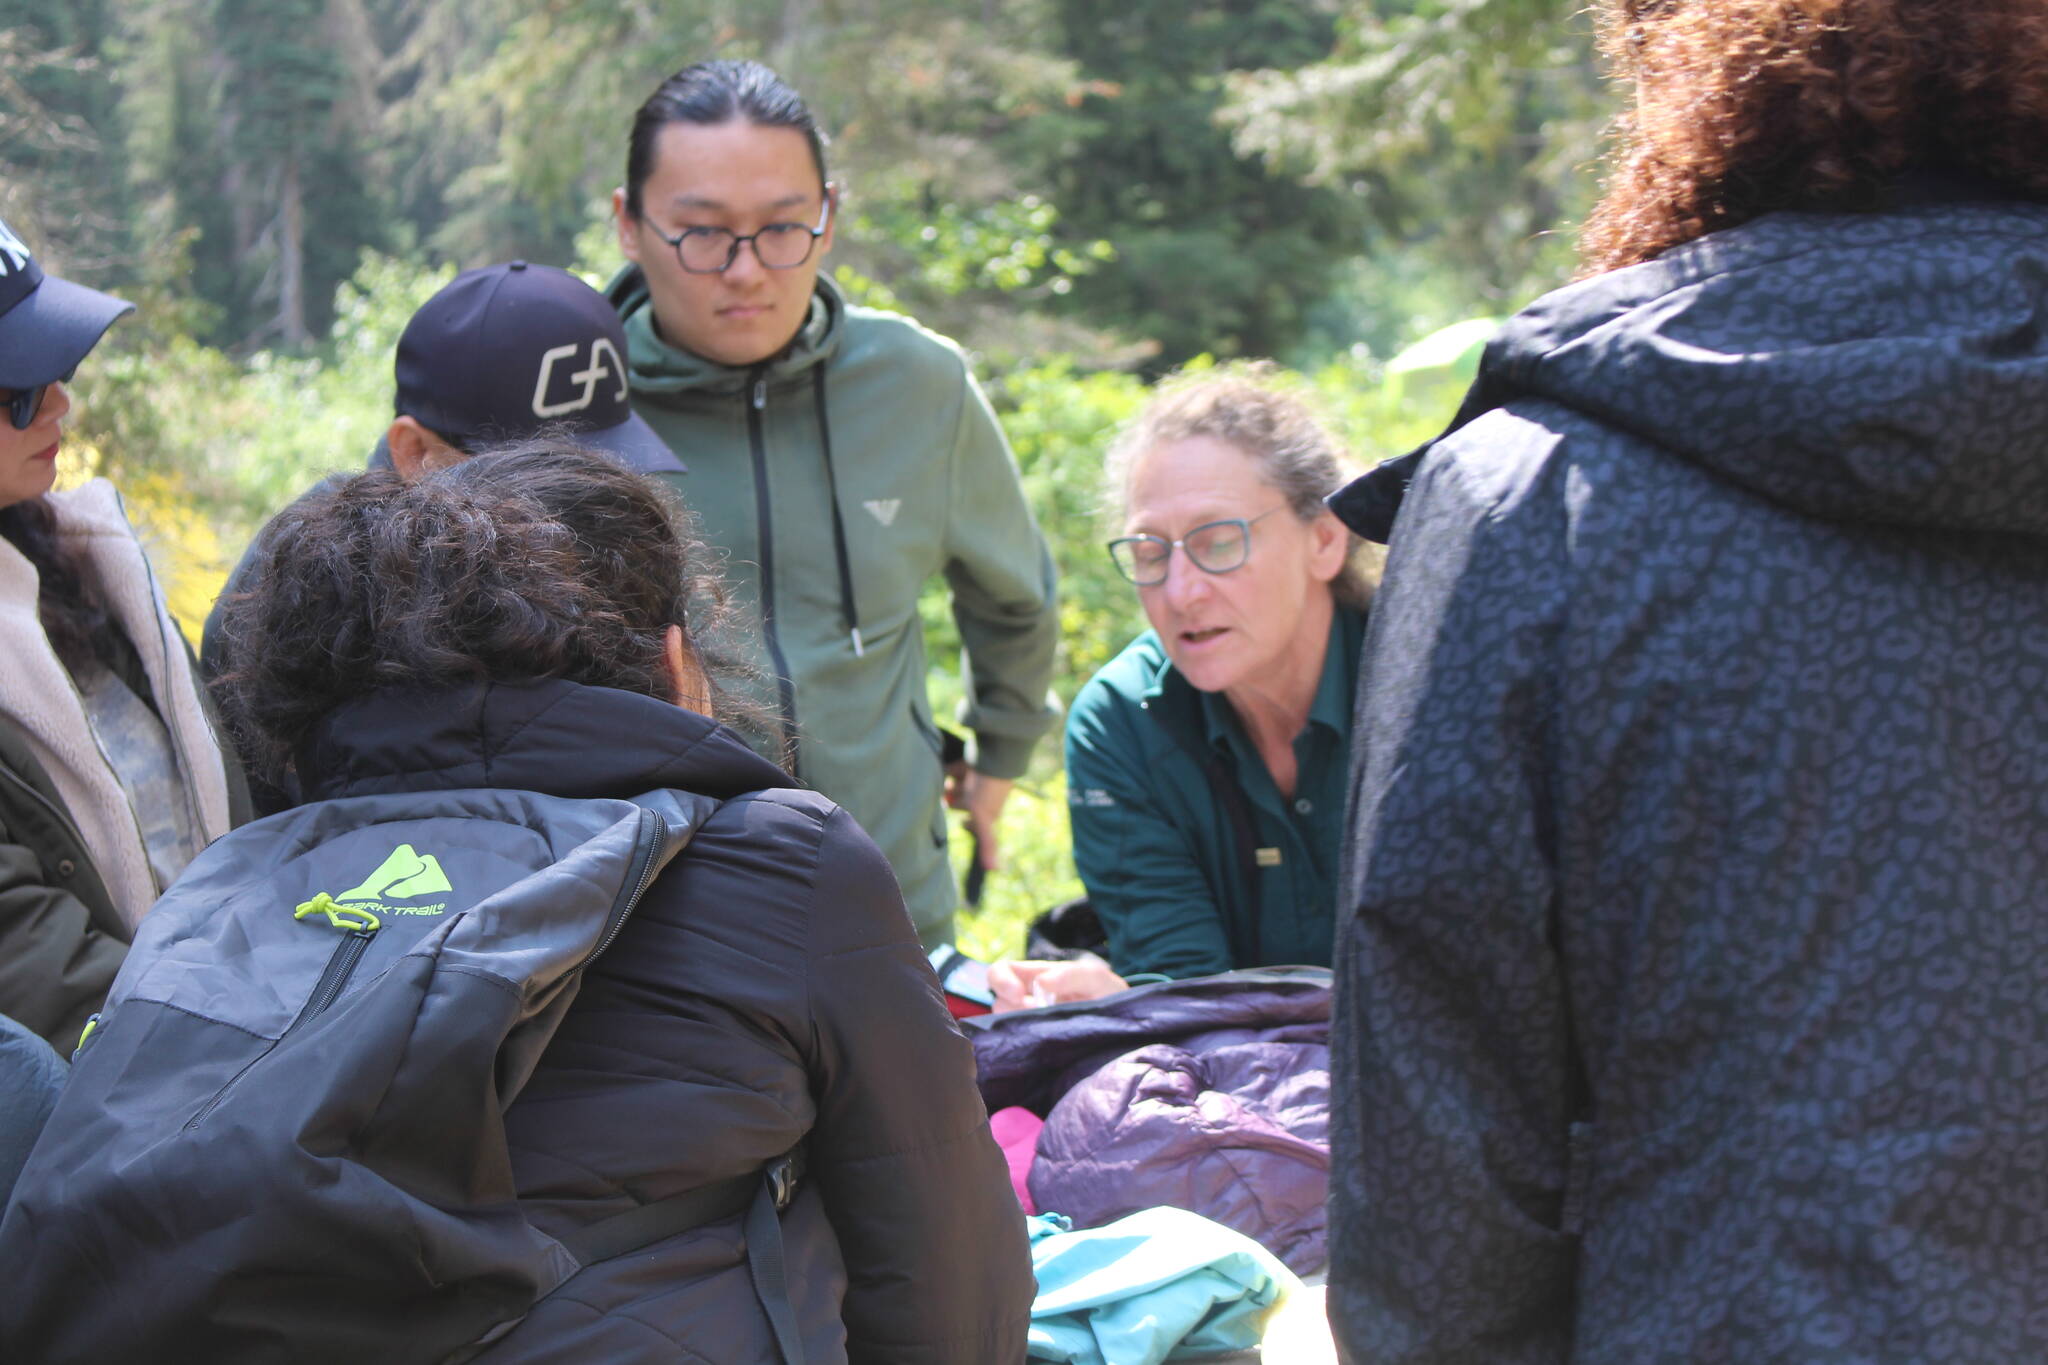 The group learns how to pack their backpacks. (Zachary Delaney/Revelstoke Review)